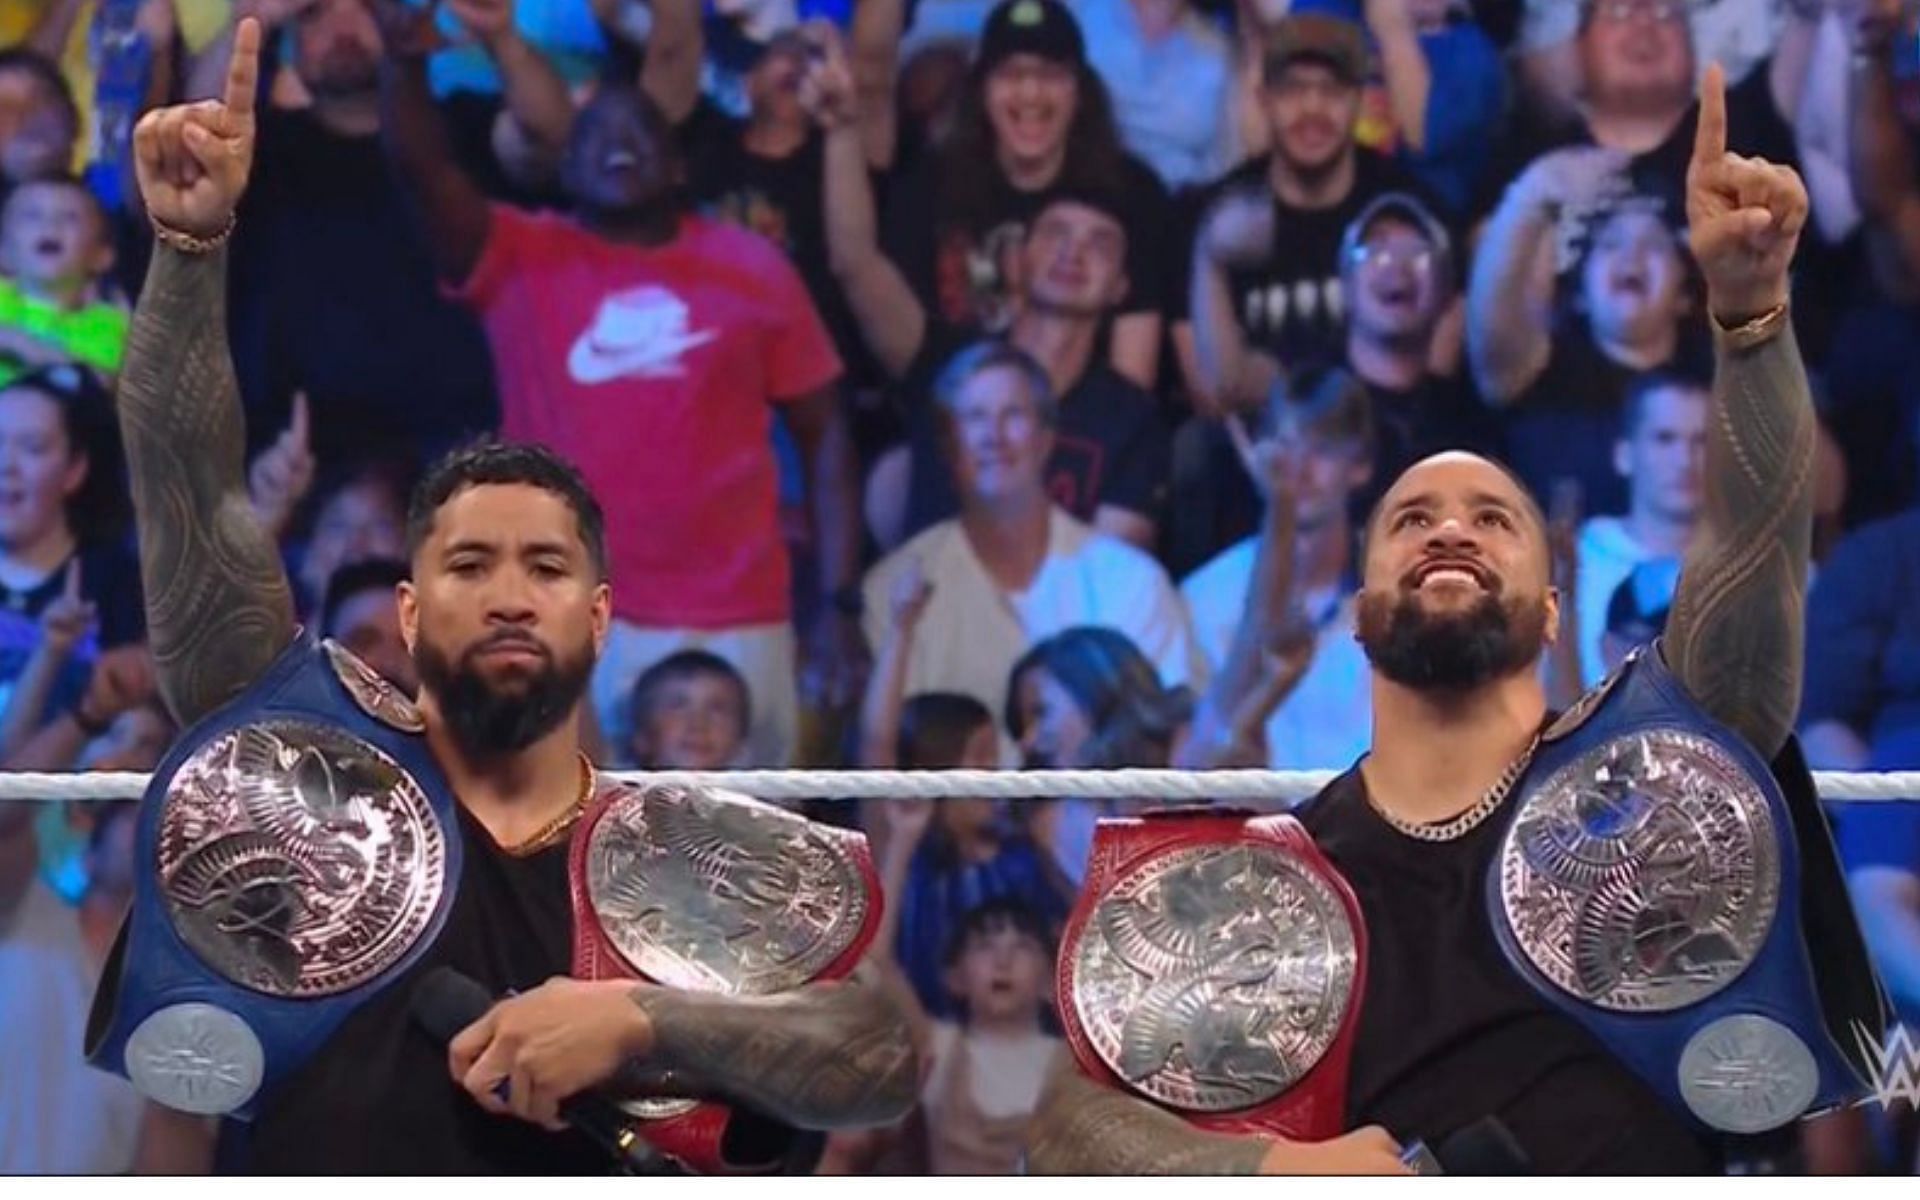 Zayn could make sure The Usos stay champs